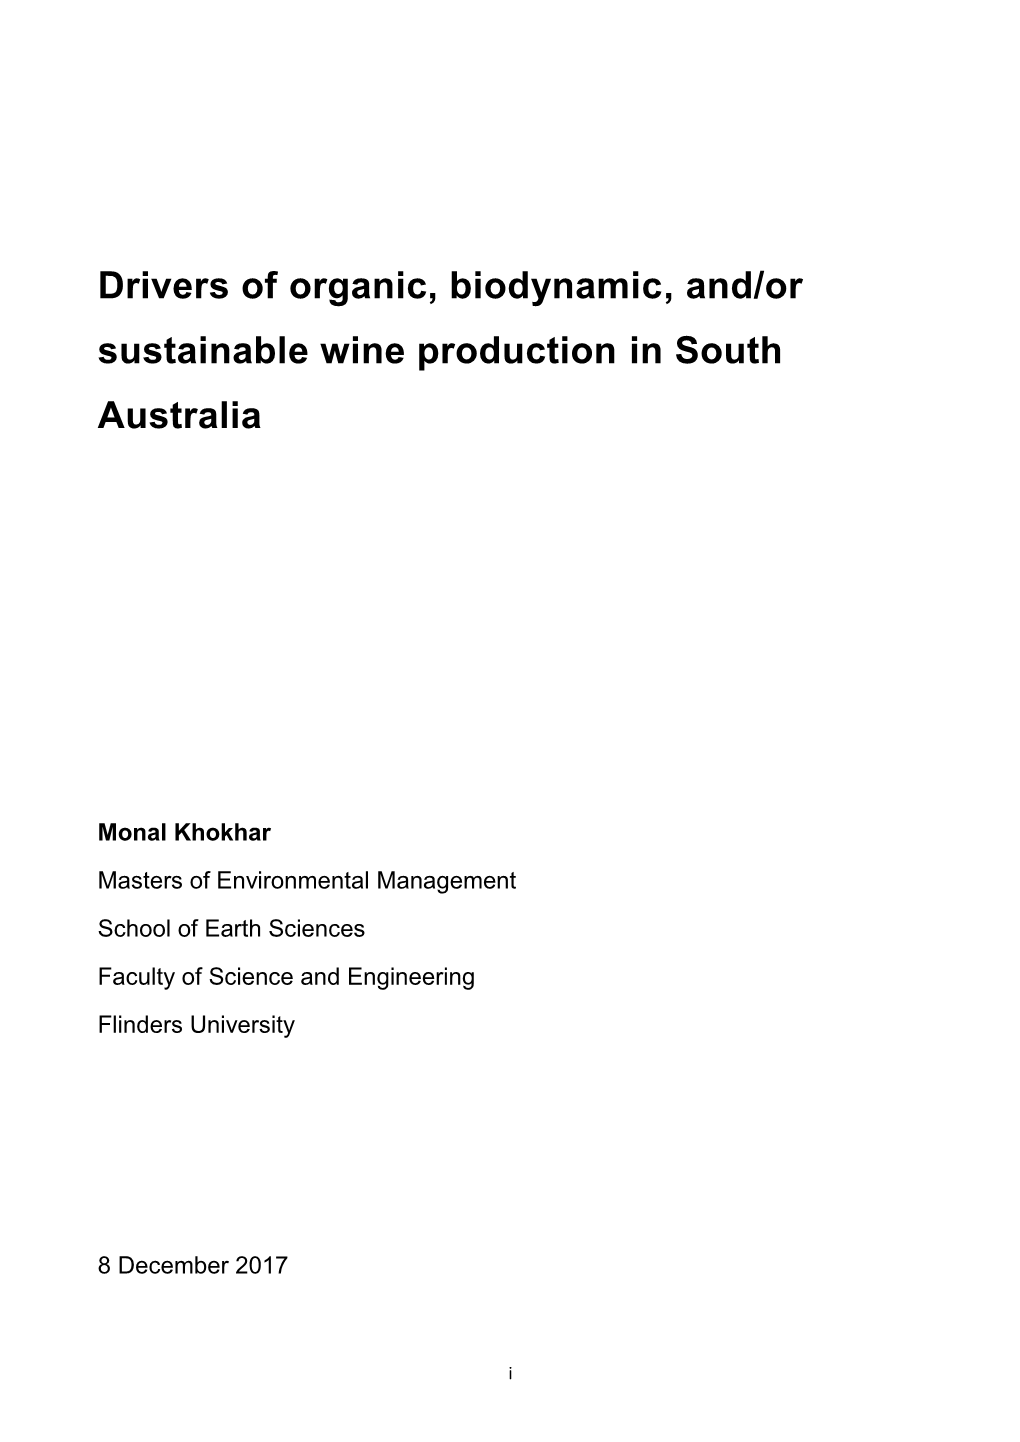 Drivers of Organic, Biodynamic, And/Or Sustainable Wine Production in South Australia